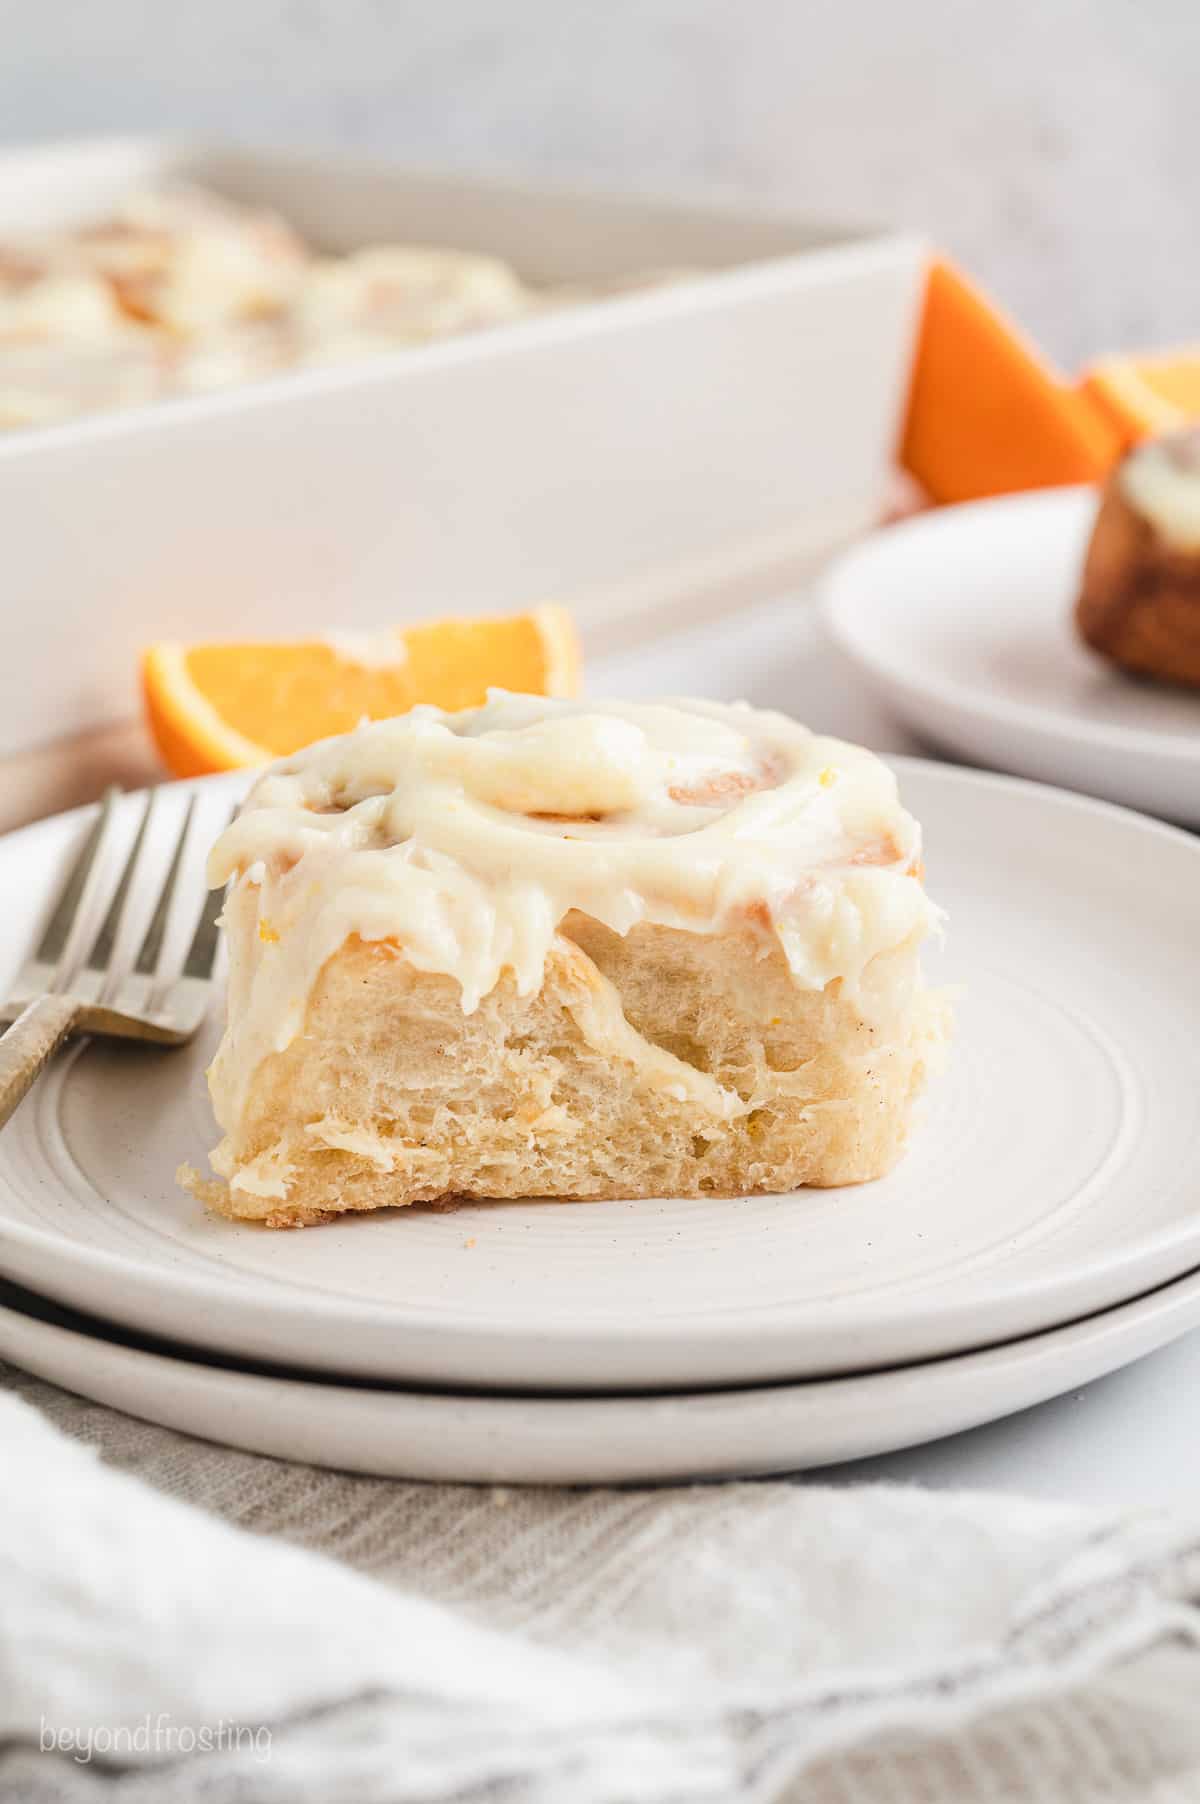 An orange roll on a white plate next to a fork, with more rolls in a baking dish in the background.